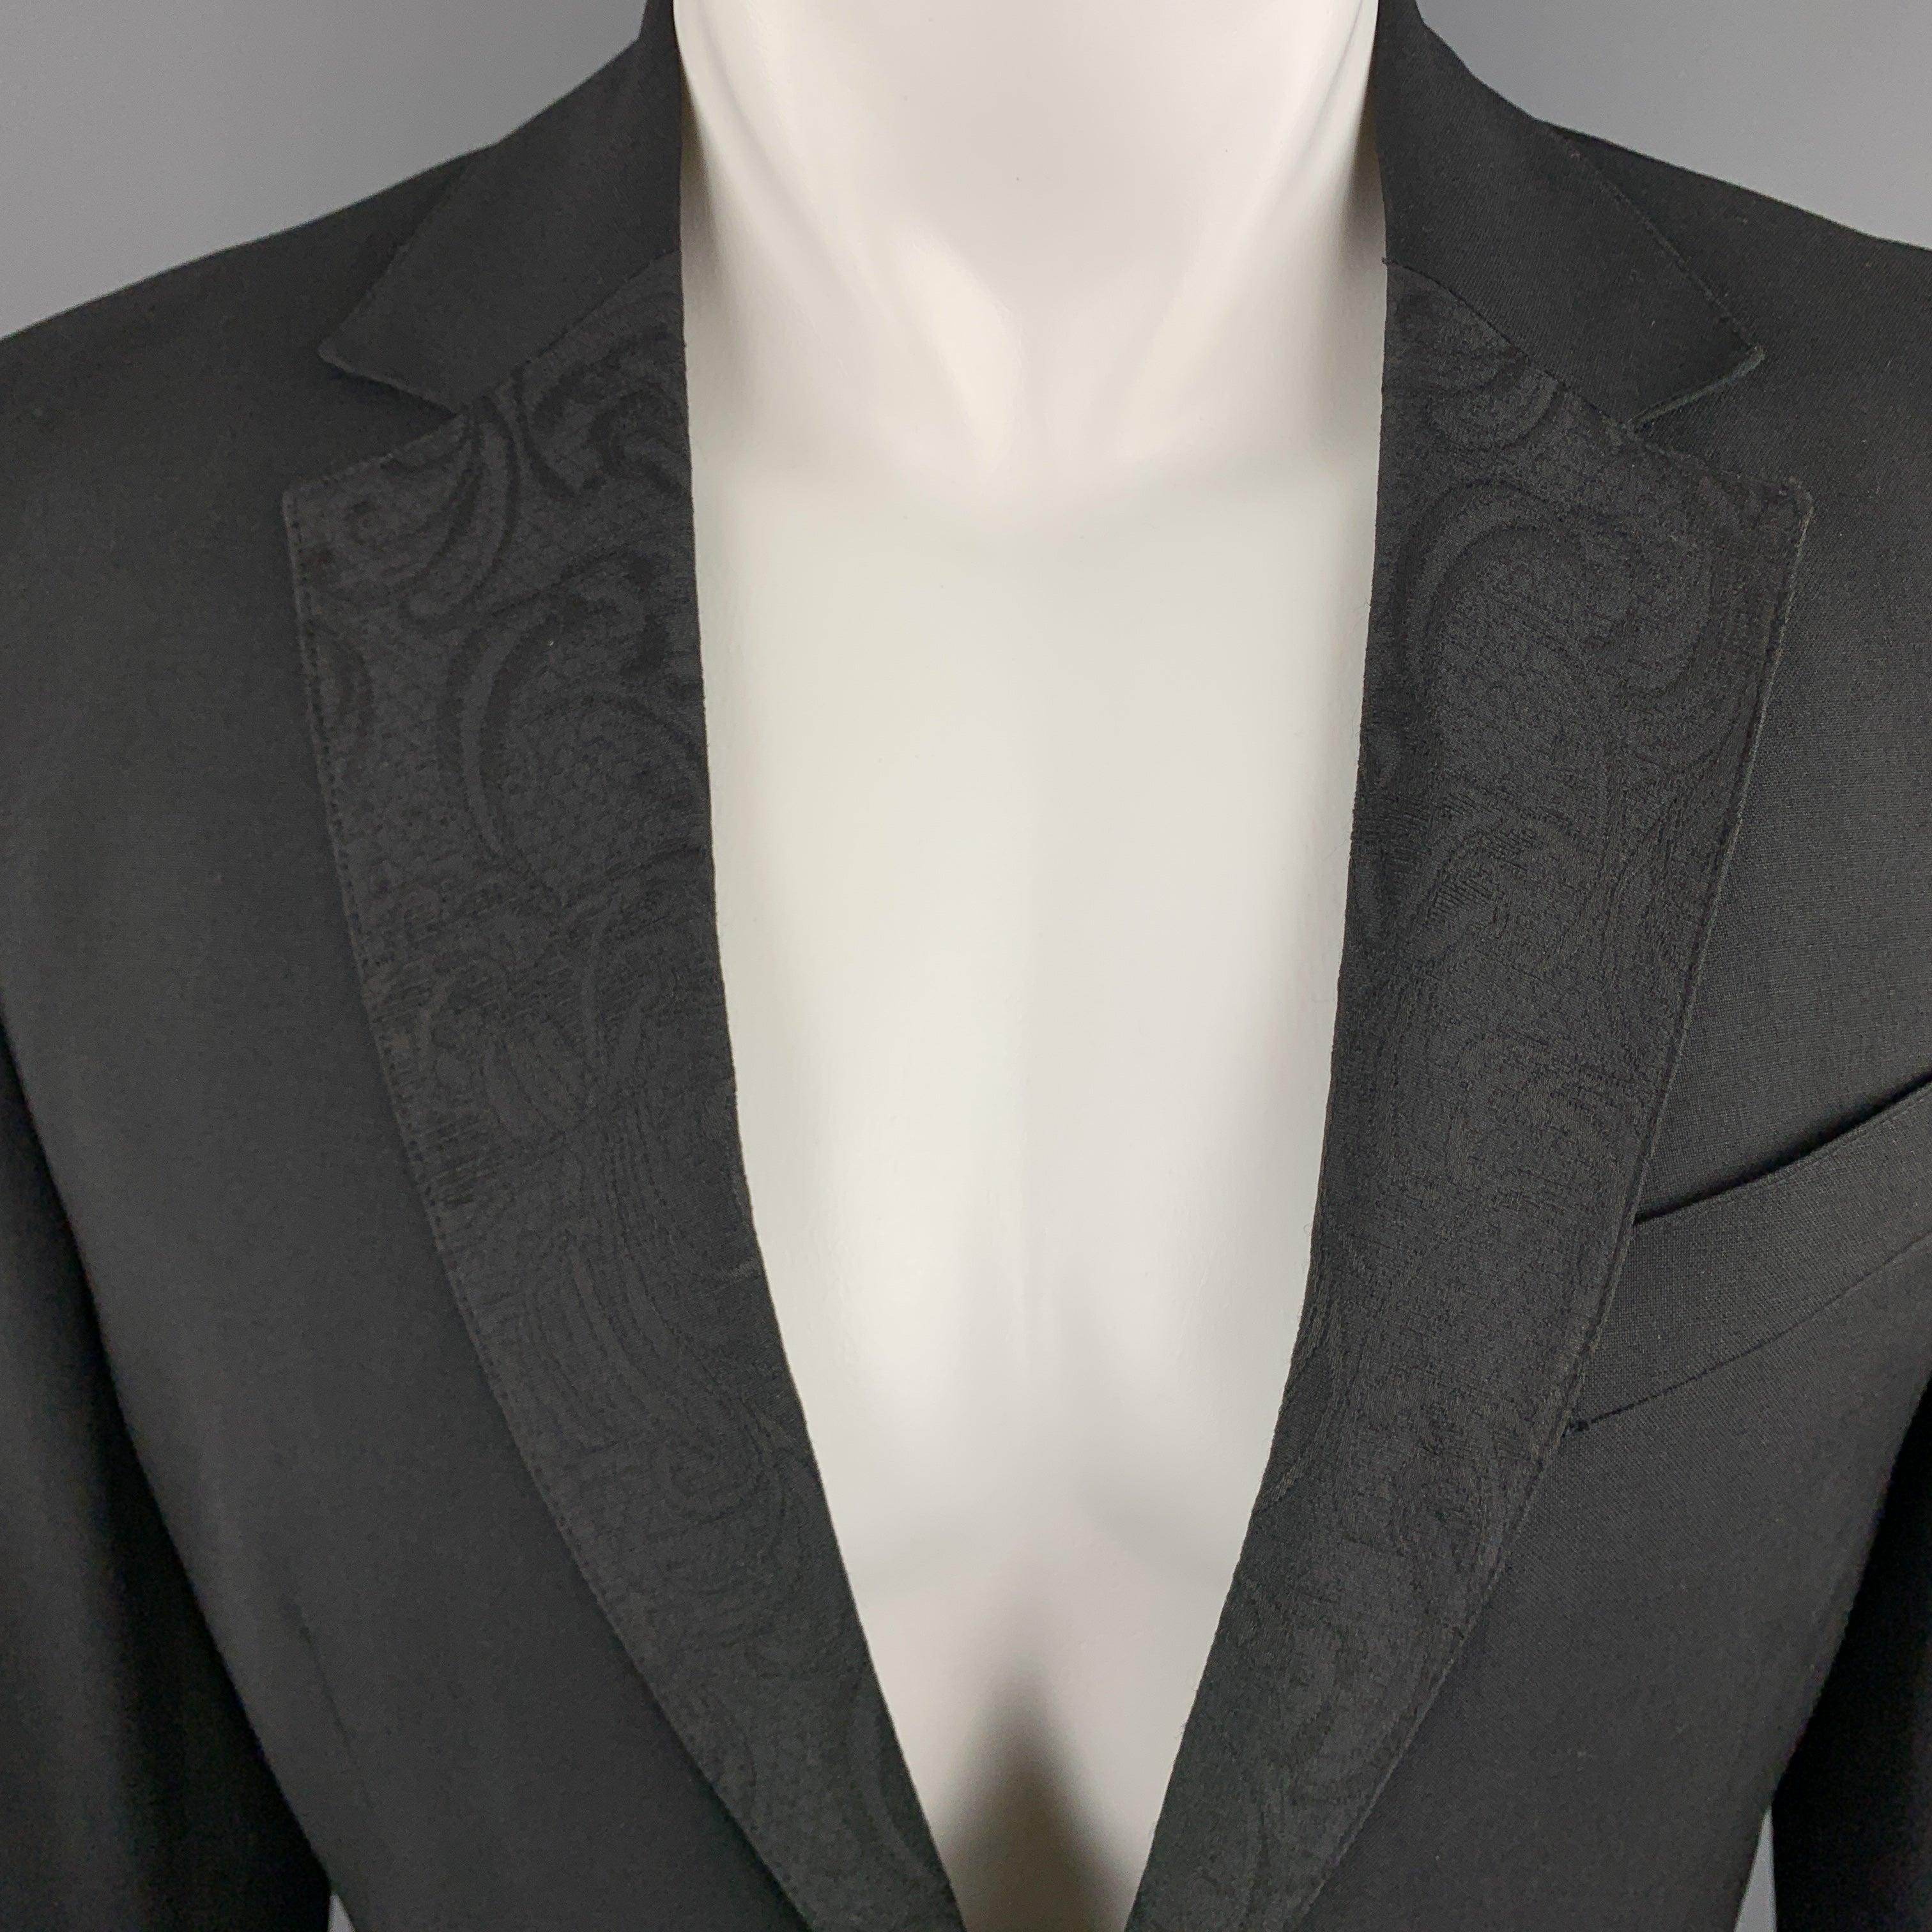 JUST CAVALLI
sport coat comes in black wool with a lace overlay notch lapel, single breasted, two button front, and brocade print satin liner. Made in Italy.Excellent Pre-Owned Condition. 

Marked:   IT 50 

Measurements: 
 
Shoulder:
17 inches